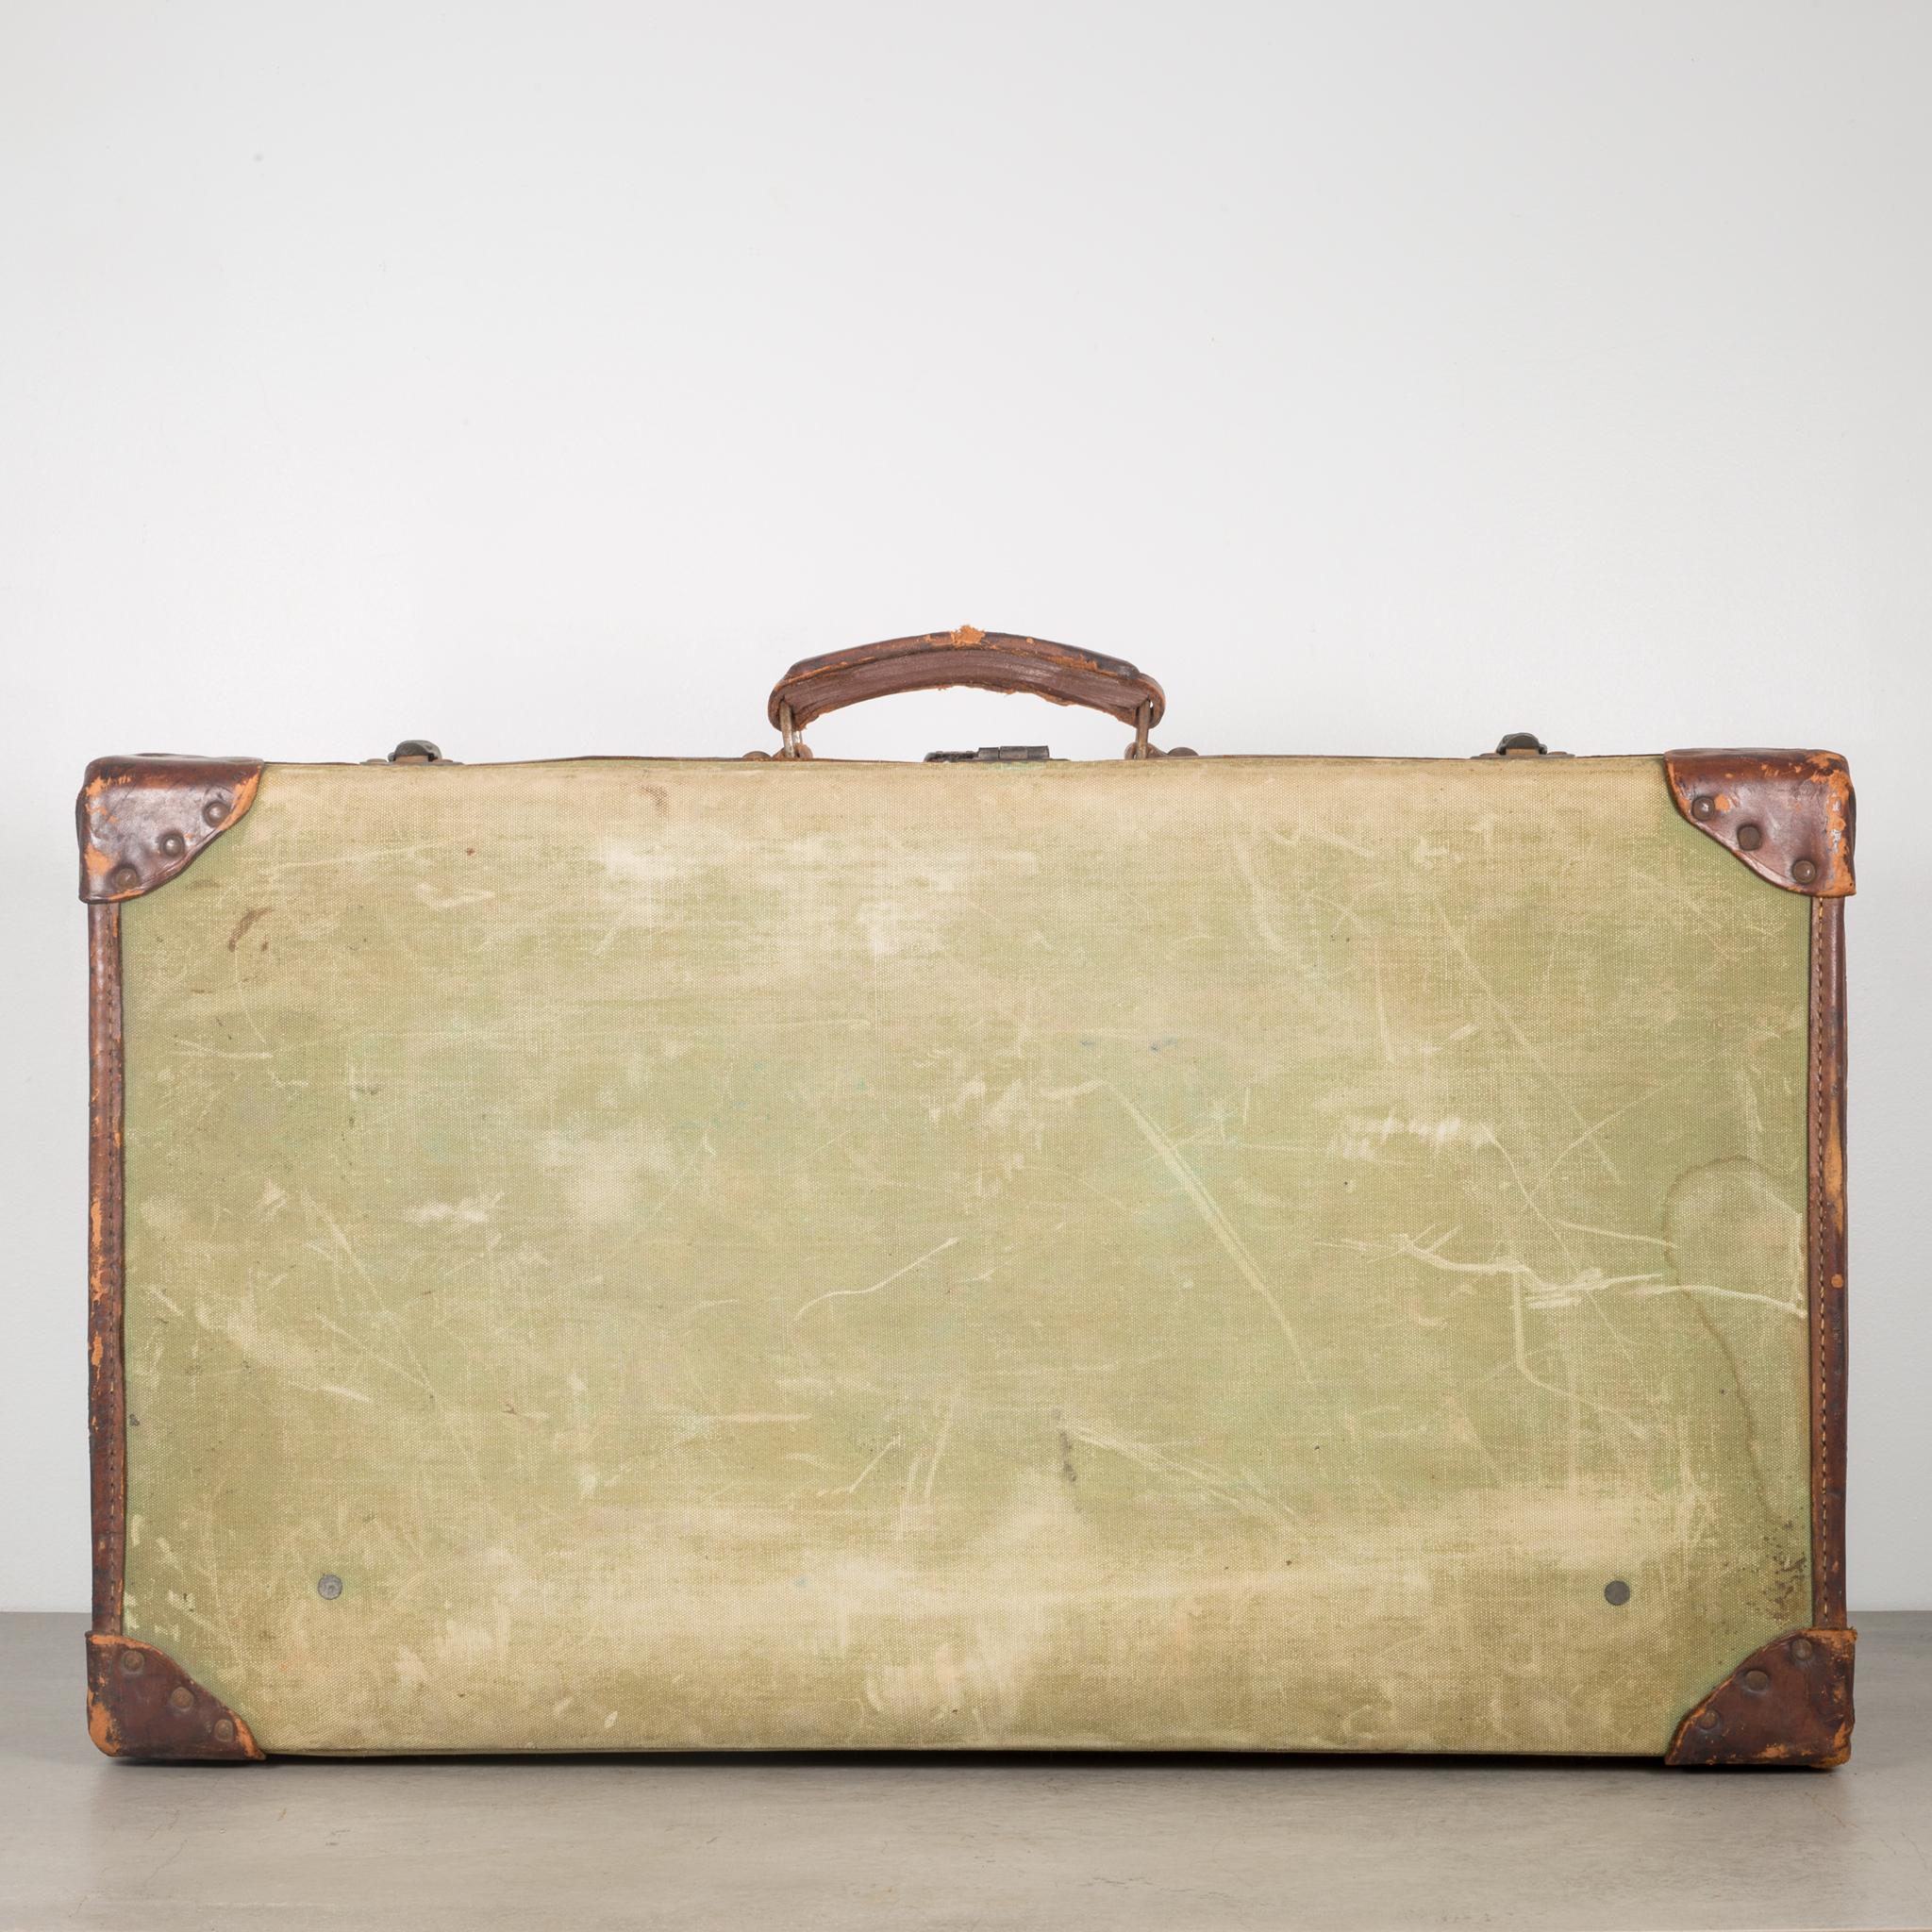 Industrial Leather/Canvas English Suitcase, circa 1944